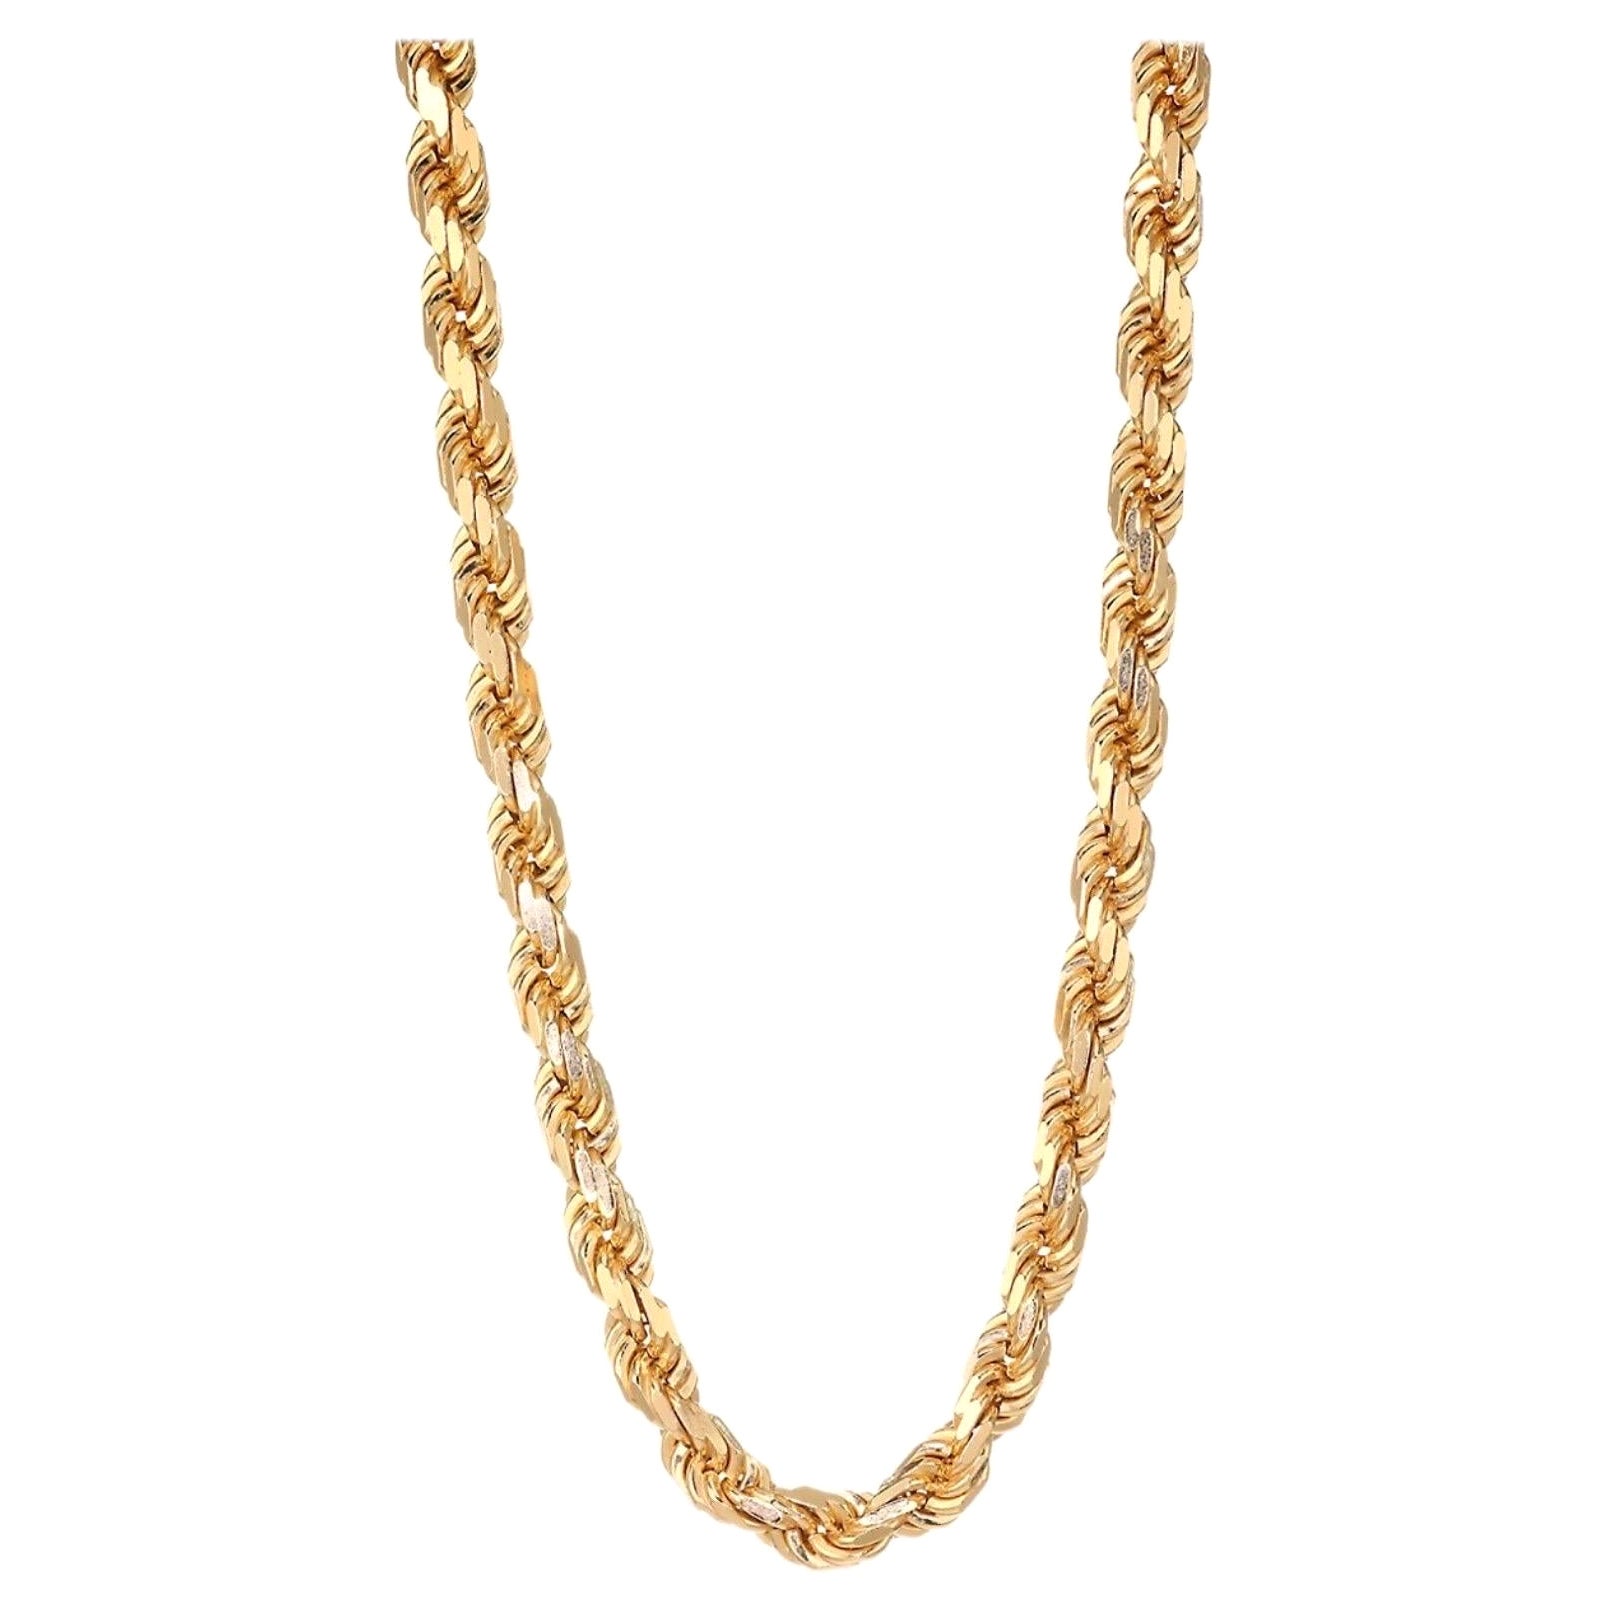 Vintage 14 Karat Yellow Gold 21 Gm, Rope Chain Necklace